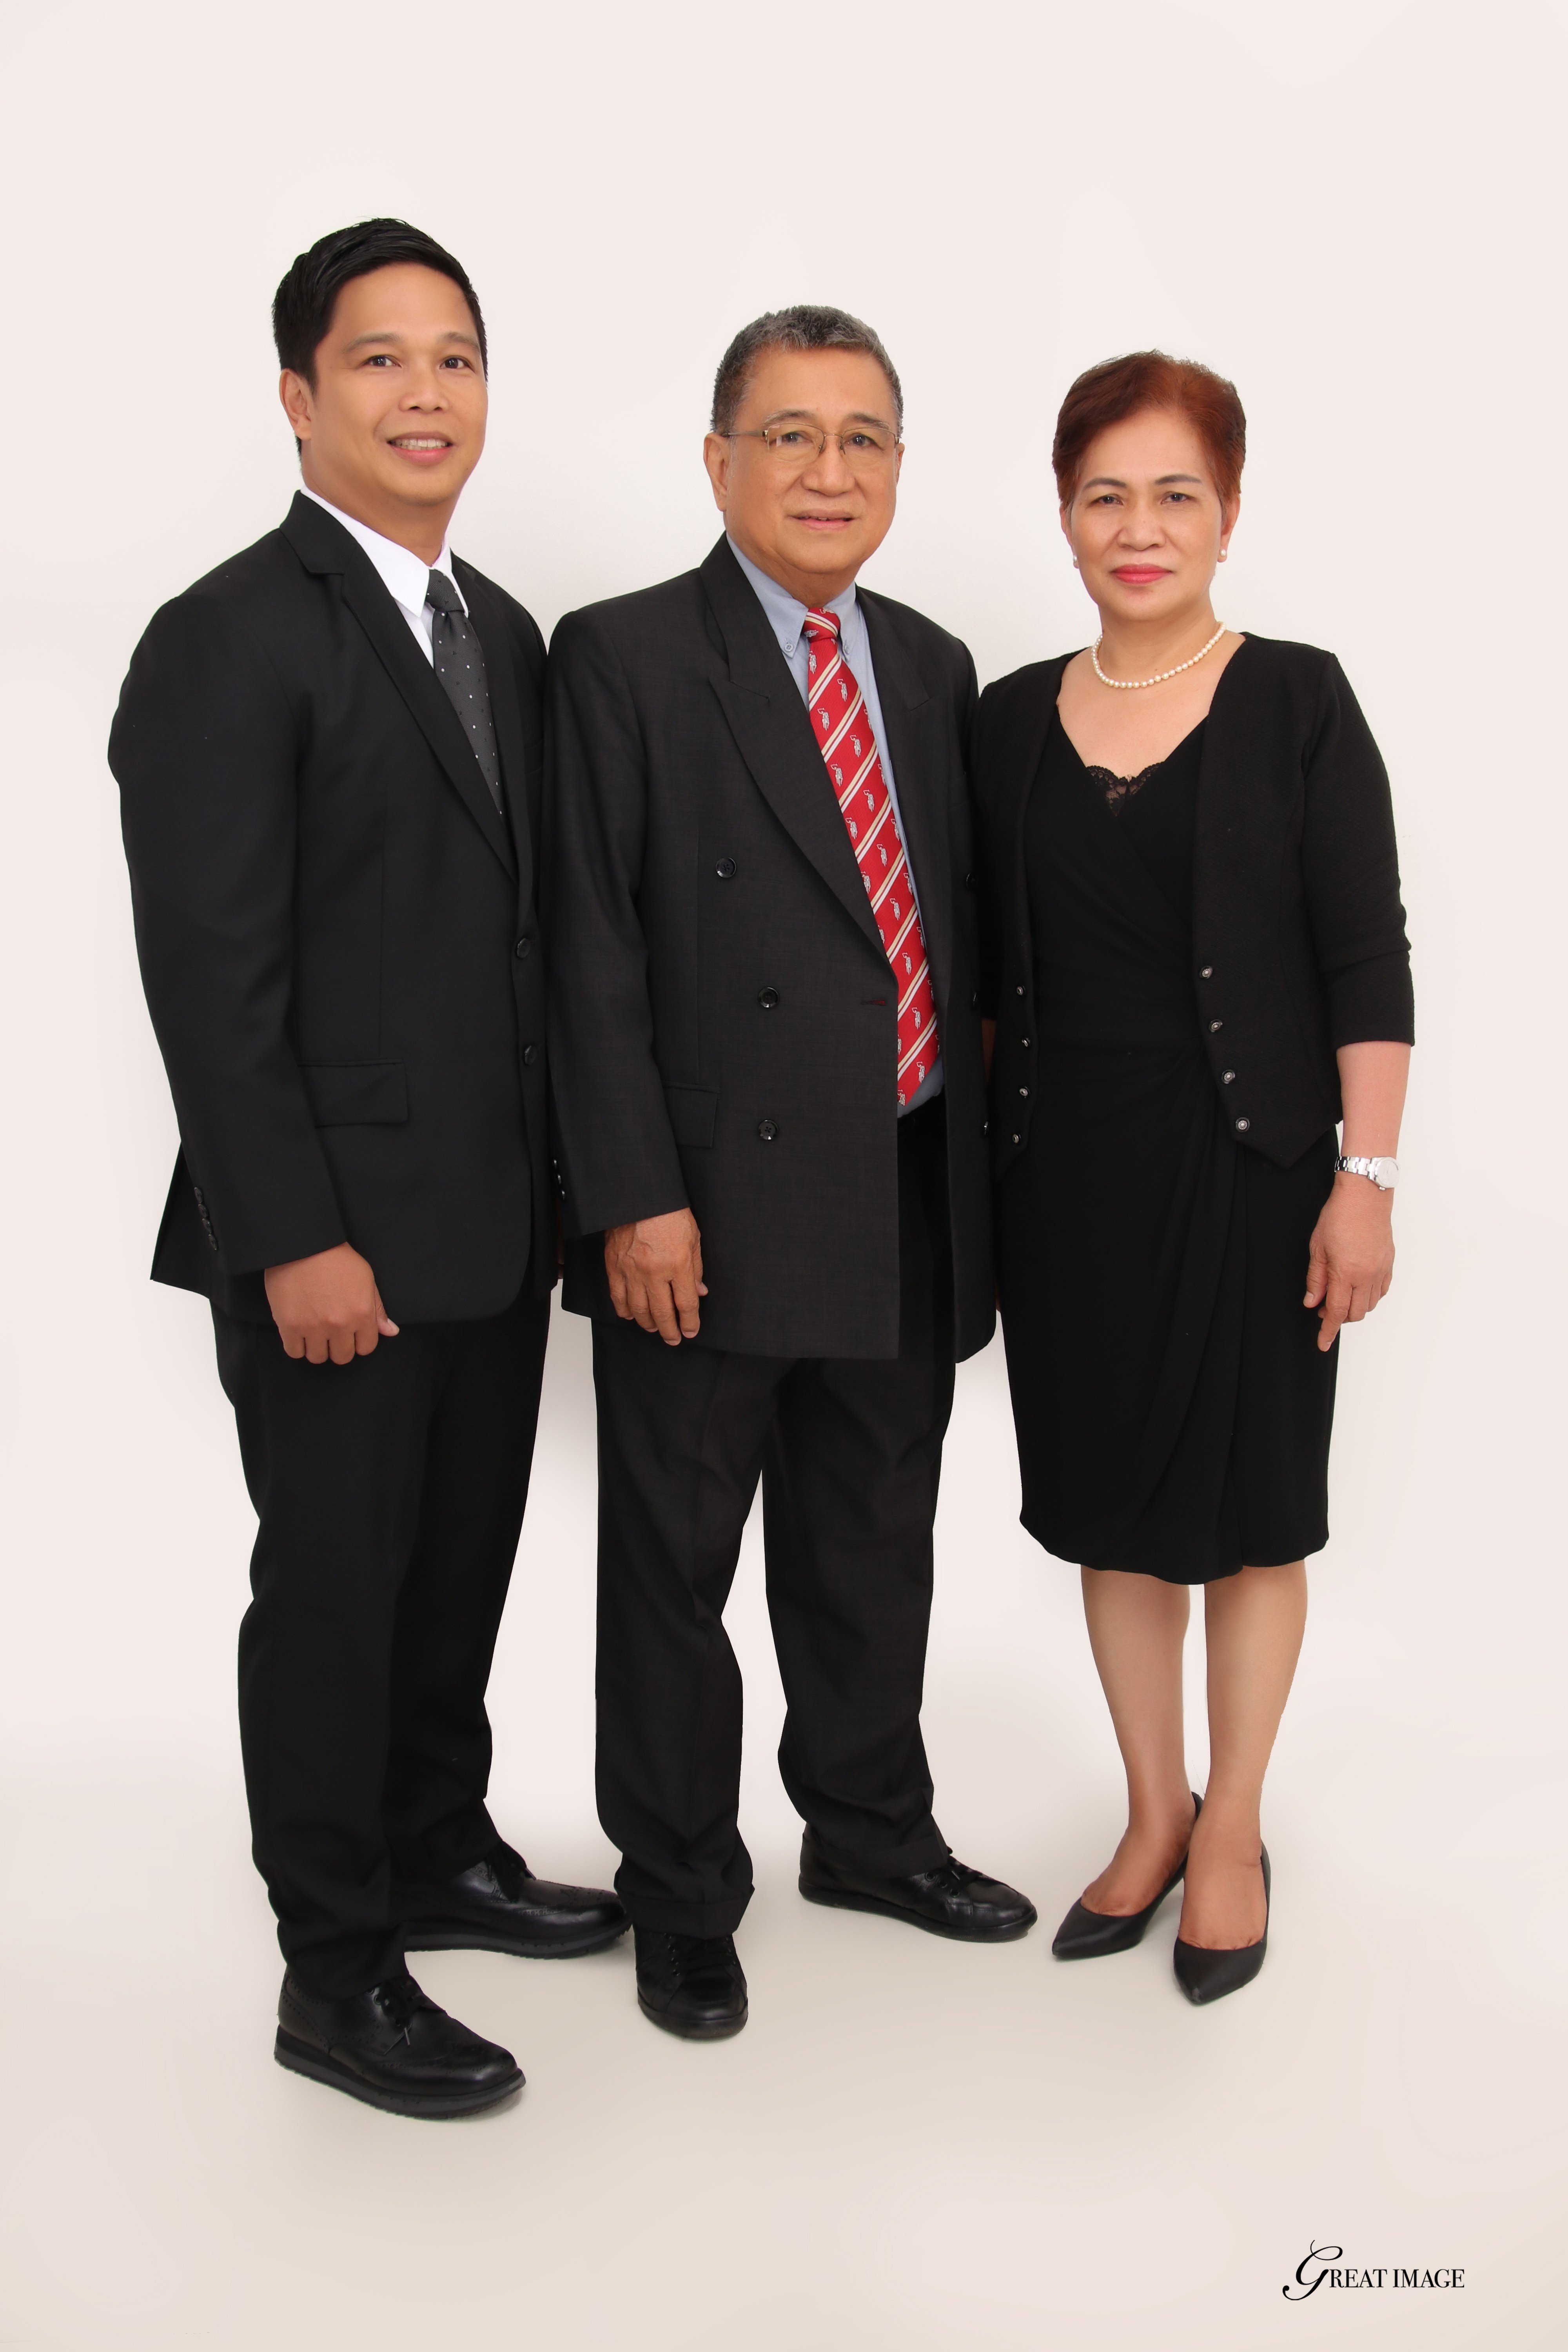 (From left) Jules Gerald Simeon, construction division vice-president; Guillermo Simeon, chairman of the board and president; and Leonora Carriaga, chief finance officer